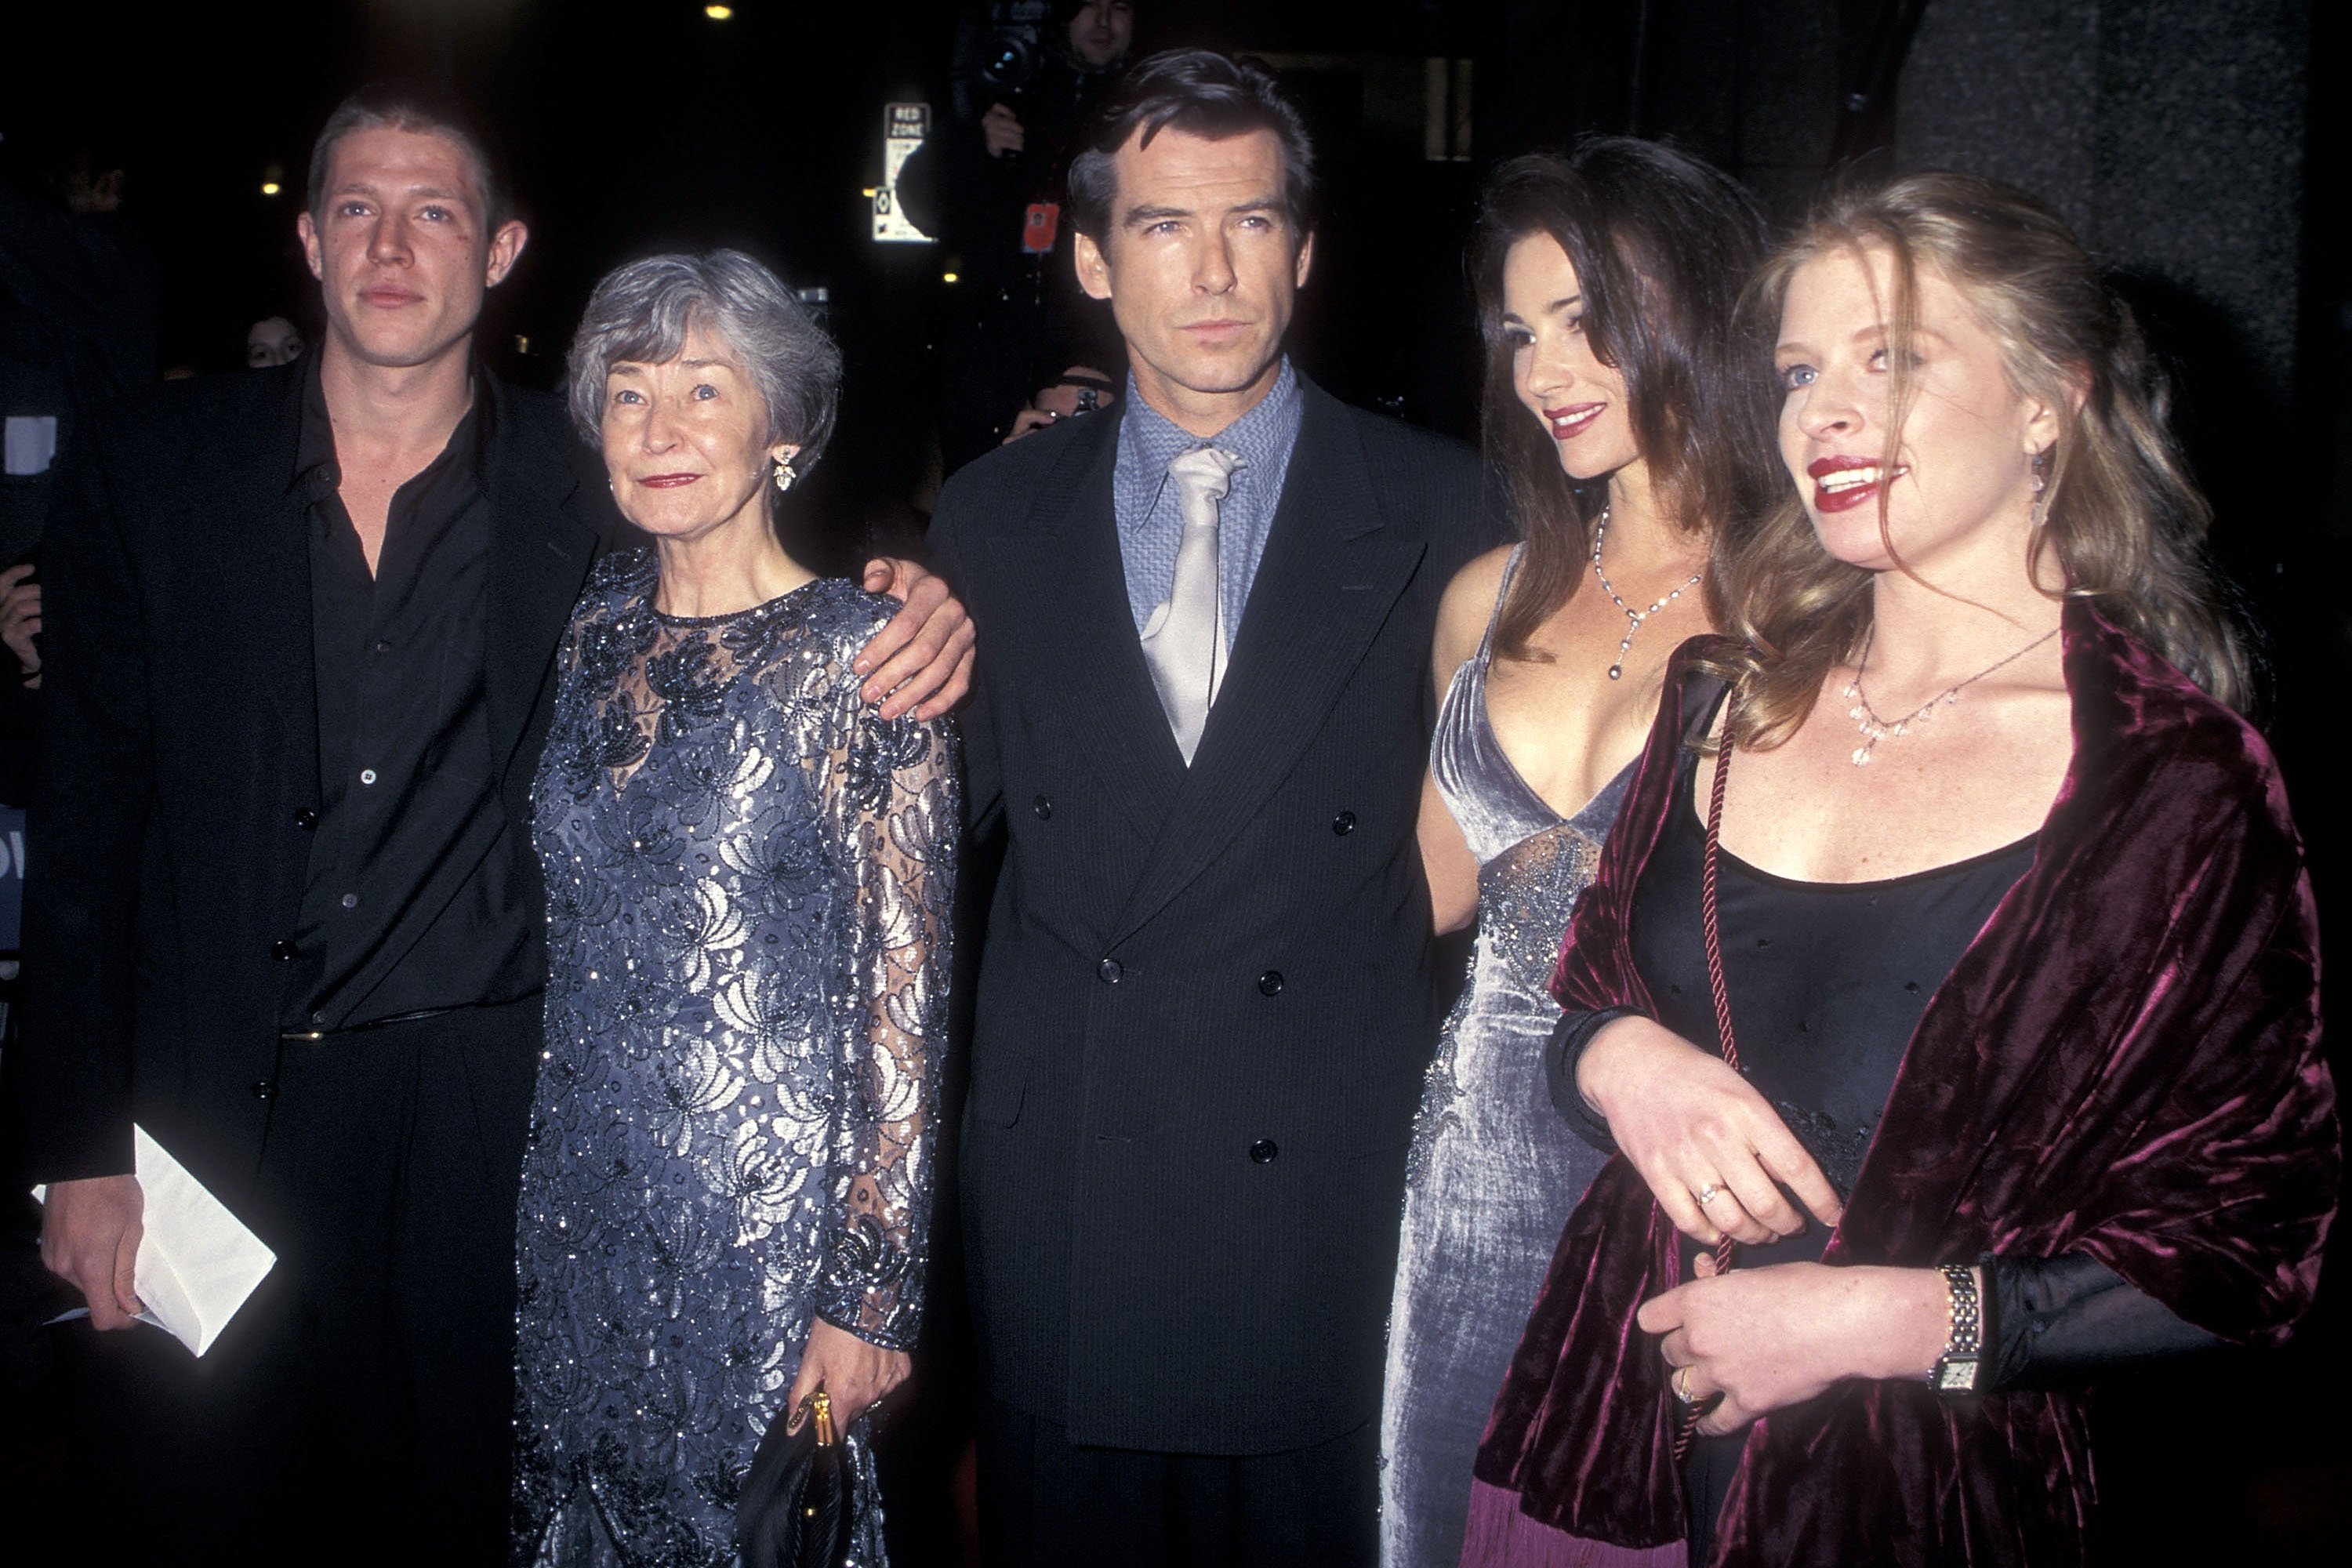 Actor Pierce Brosnan, girlfriend Keely Shaye Smith, his son Christopher Brosnan, his daughter Charlotte Brosnan and his mother May Smith attend the "Goldeneye" New York City Premiere Party on November 13, 1995 at Radio City Music Hall in New York City. | Source: Getty Images